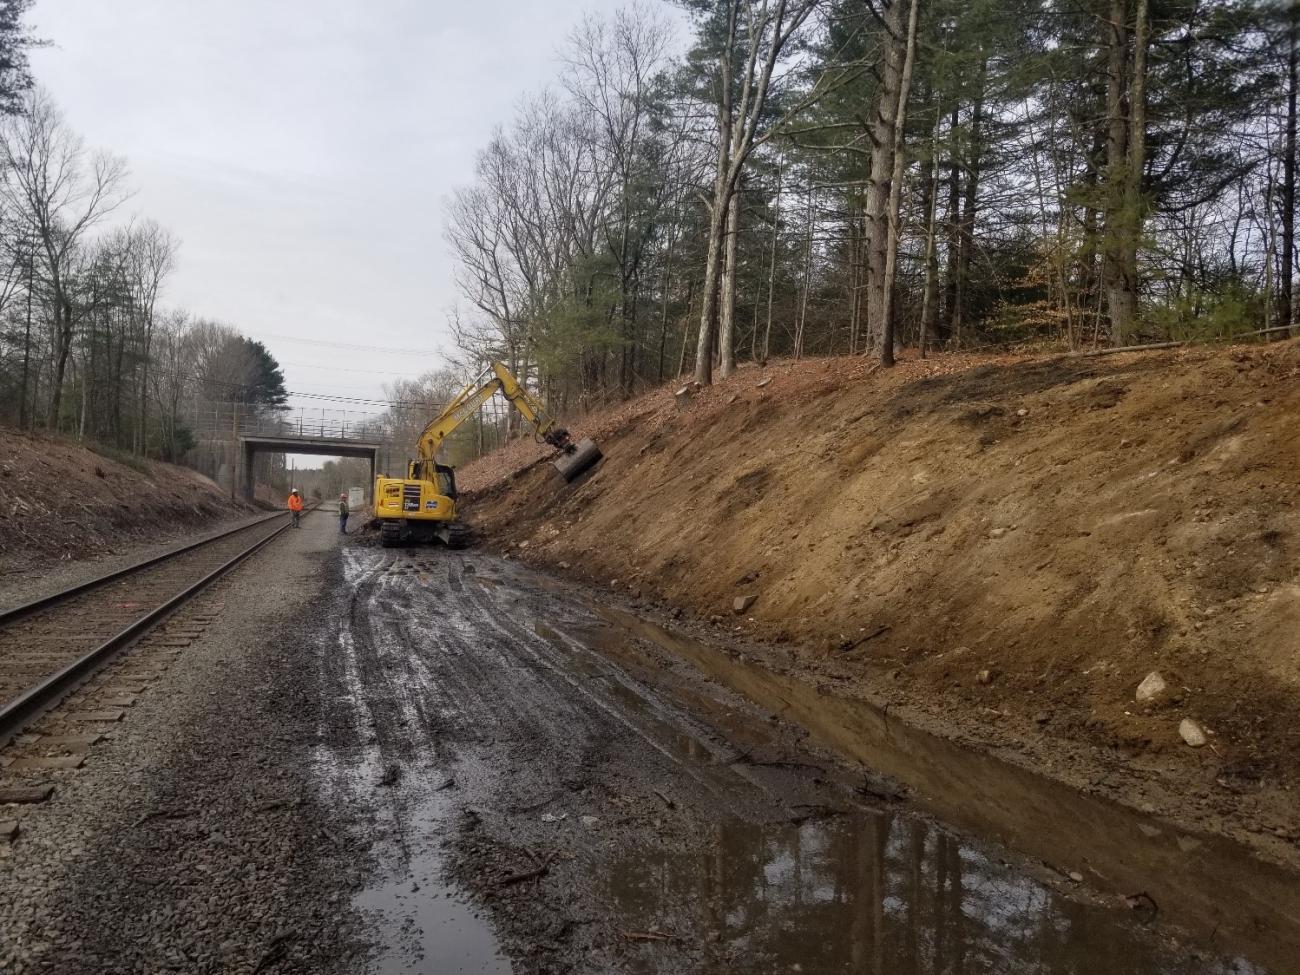 The area around the track is excavated to make room for new track as Phase 2 of the Franklin Double Track project begins (February 2020)